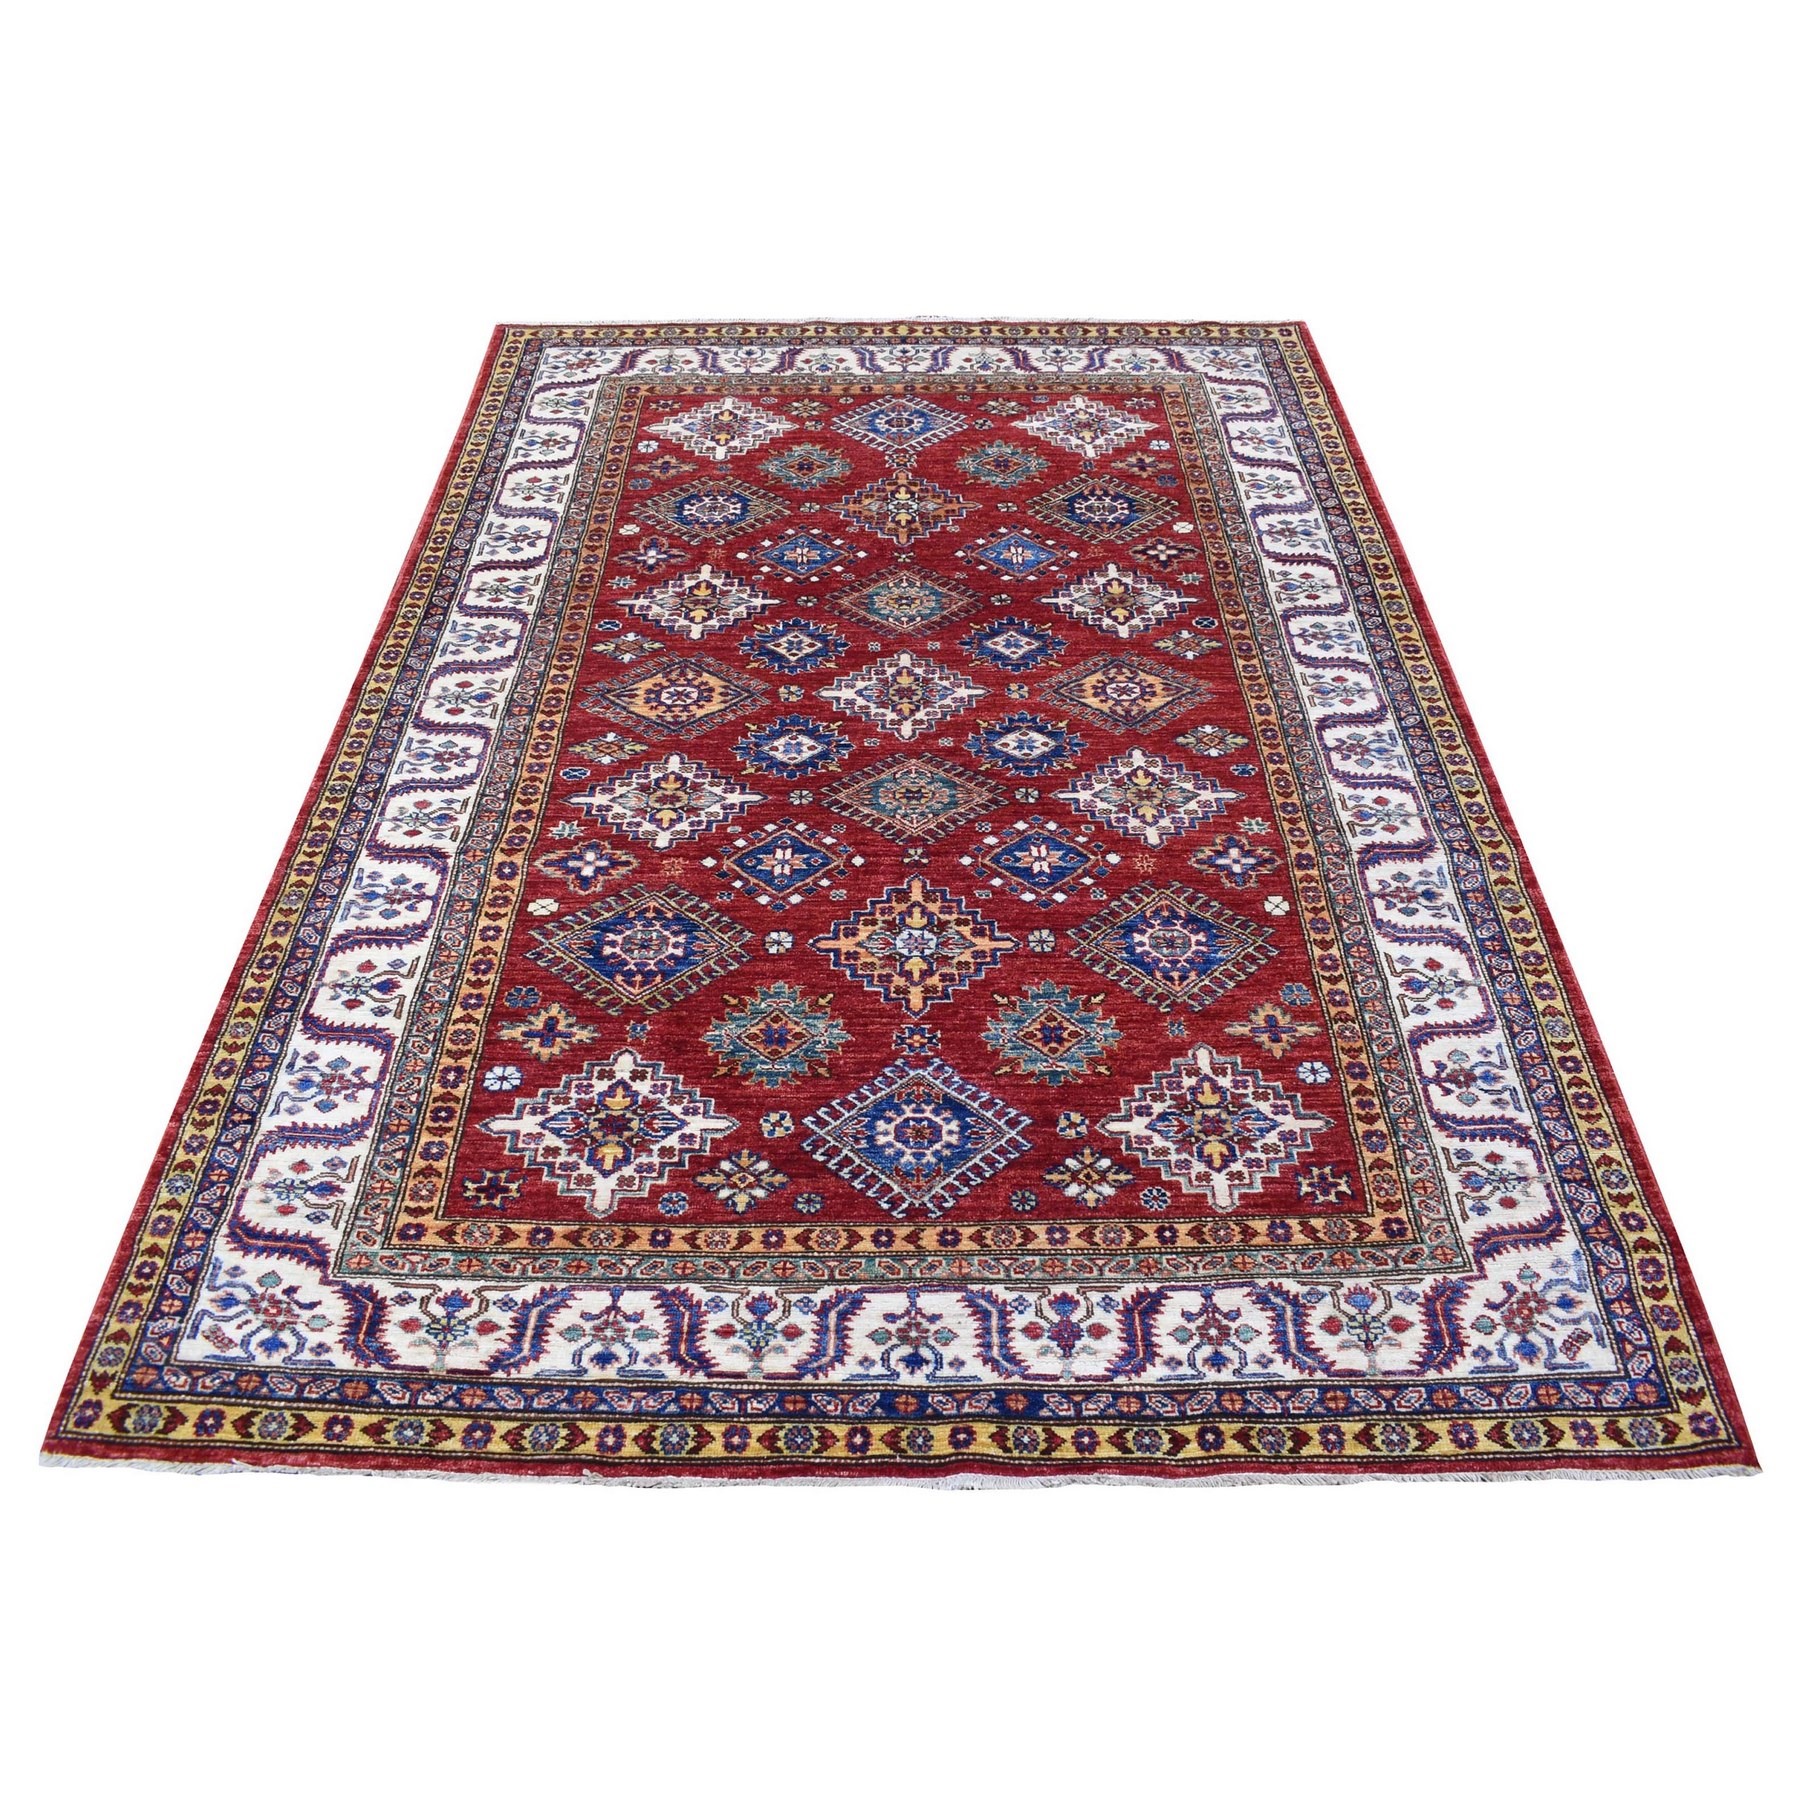 Caucasian Collection Hand Knotted Red Rug No: 1135234